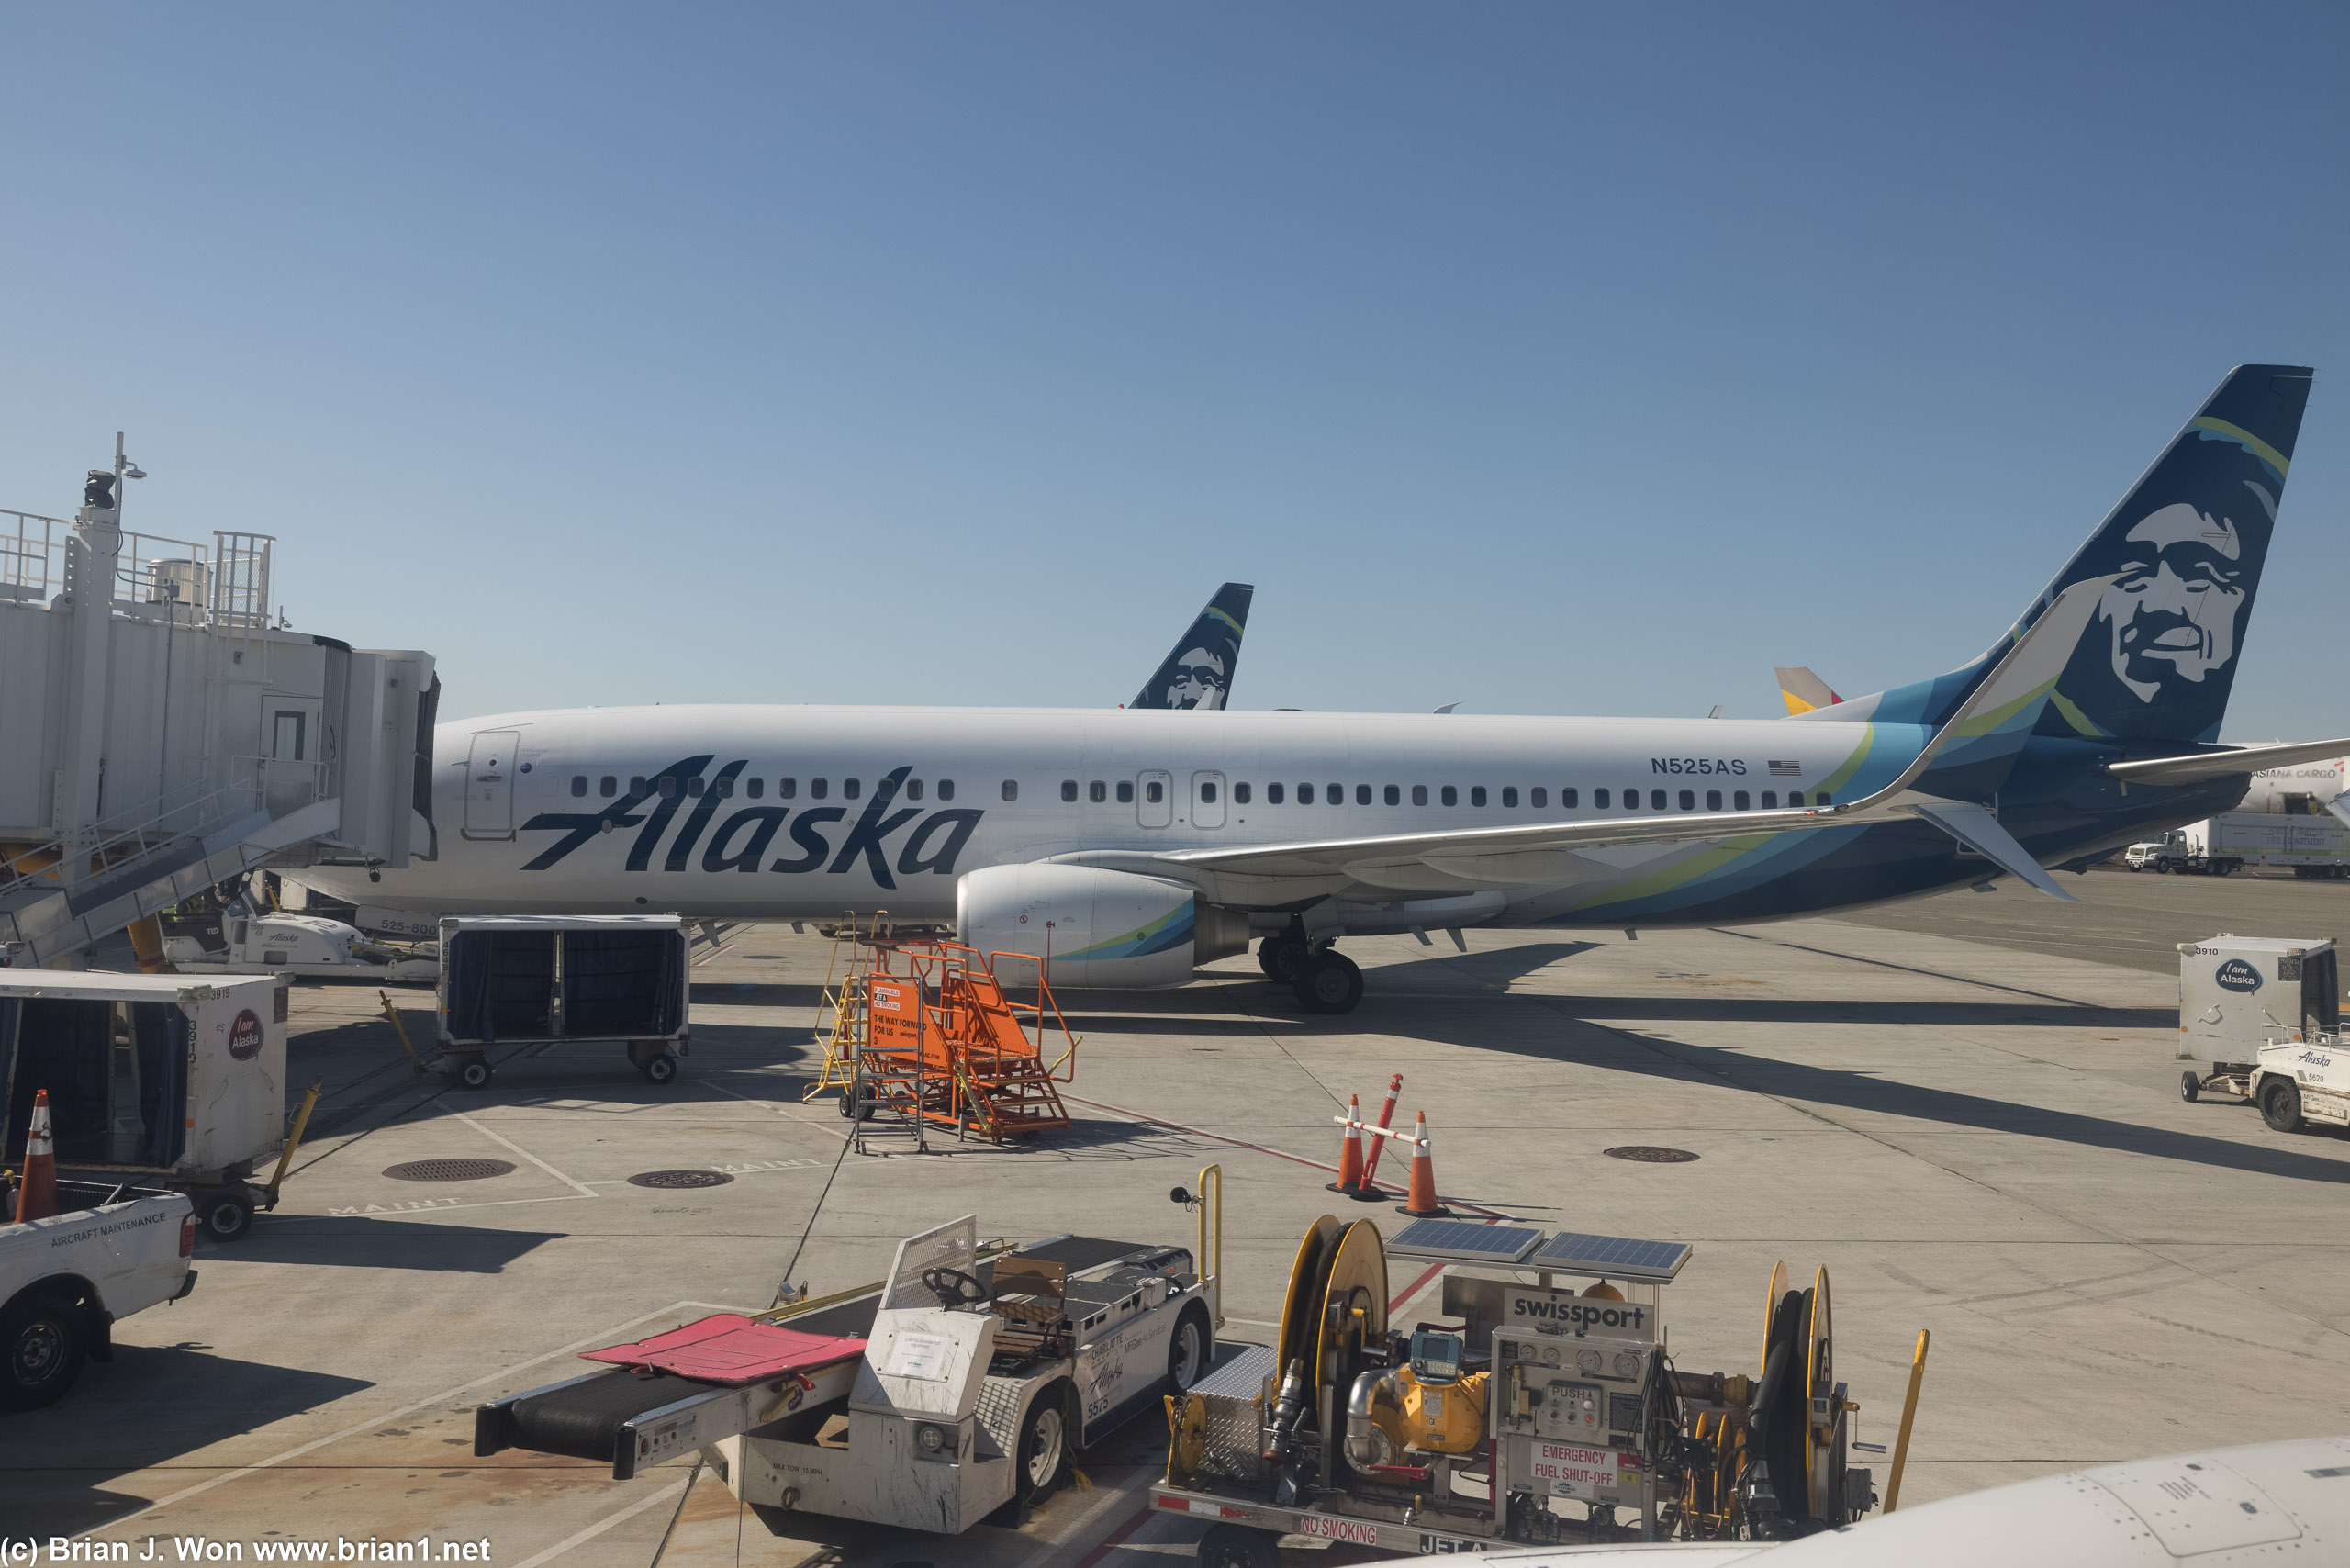 SeaTac means Alaska Airlines 737's everywhere.